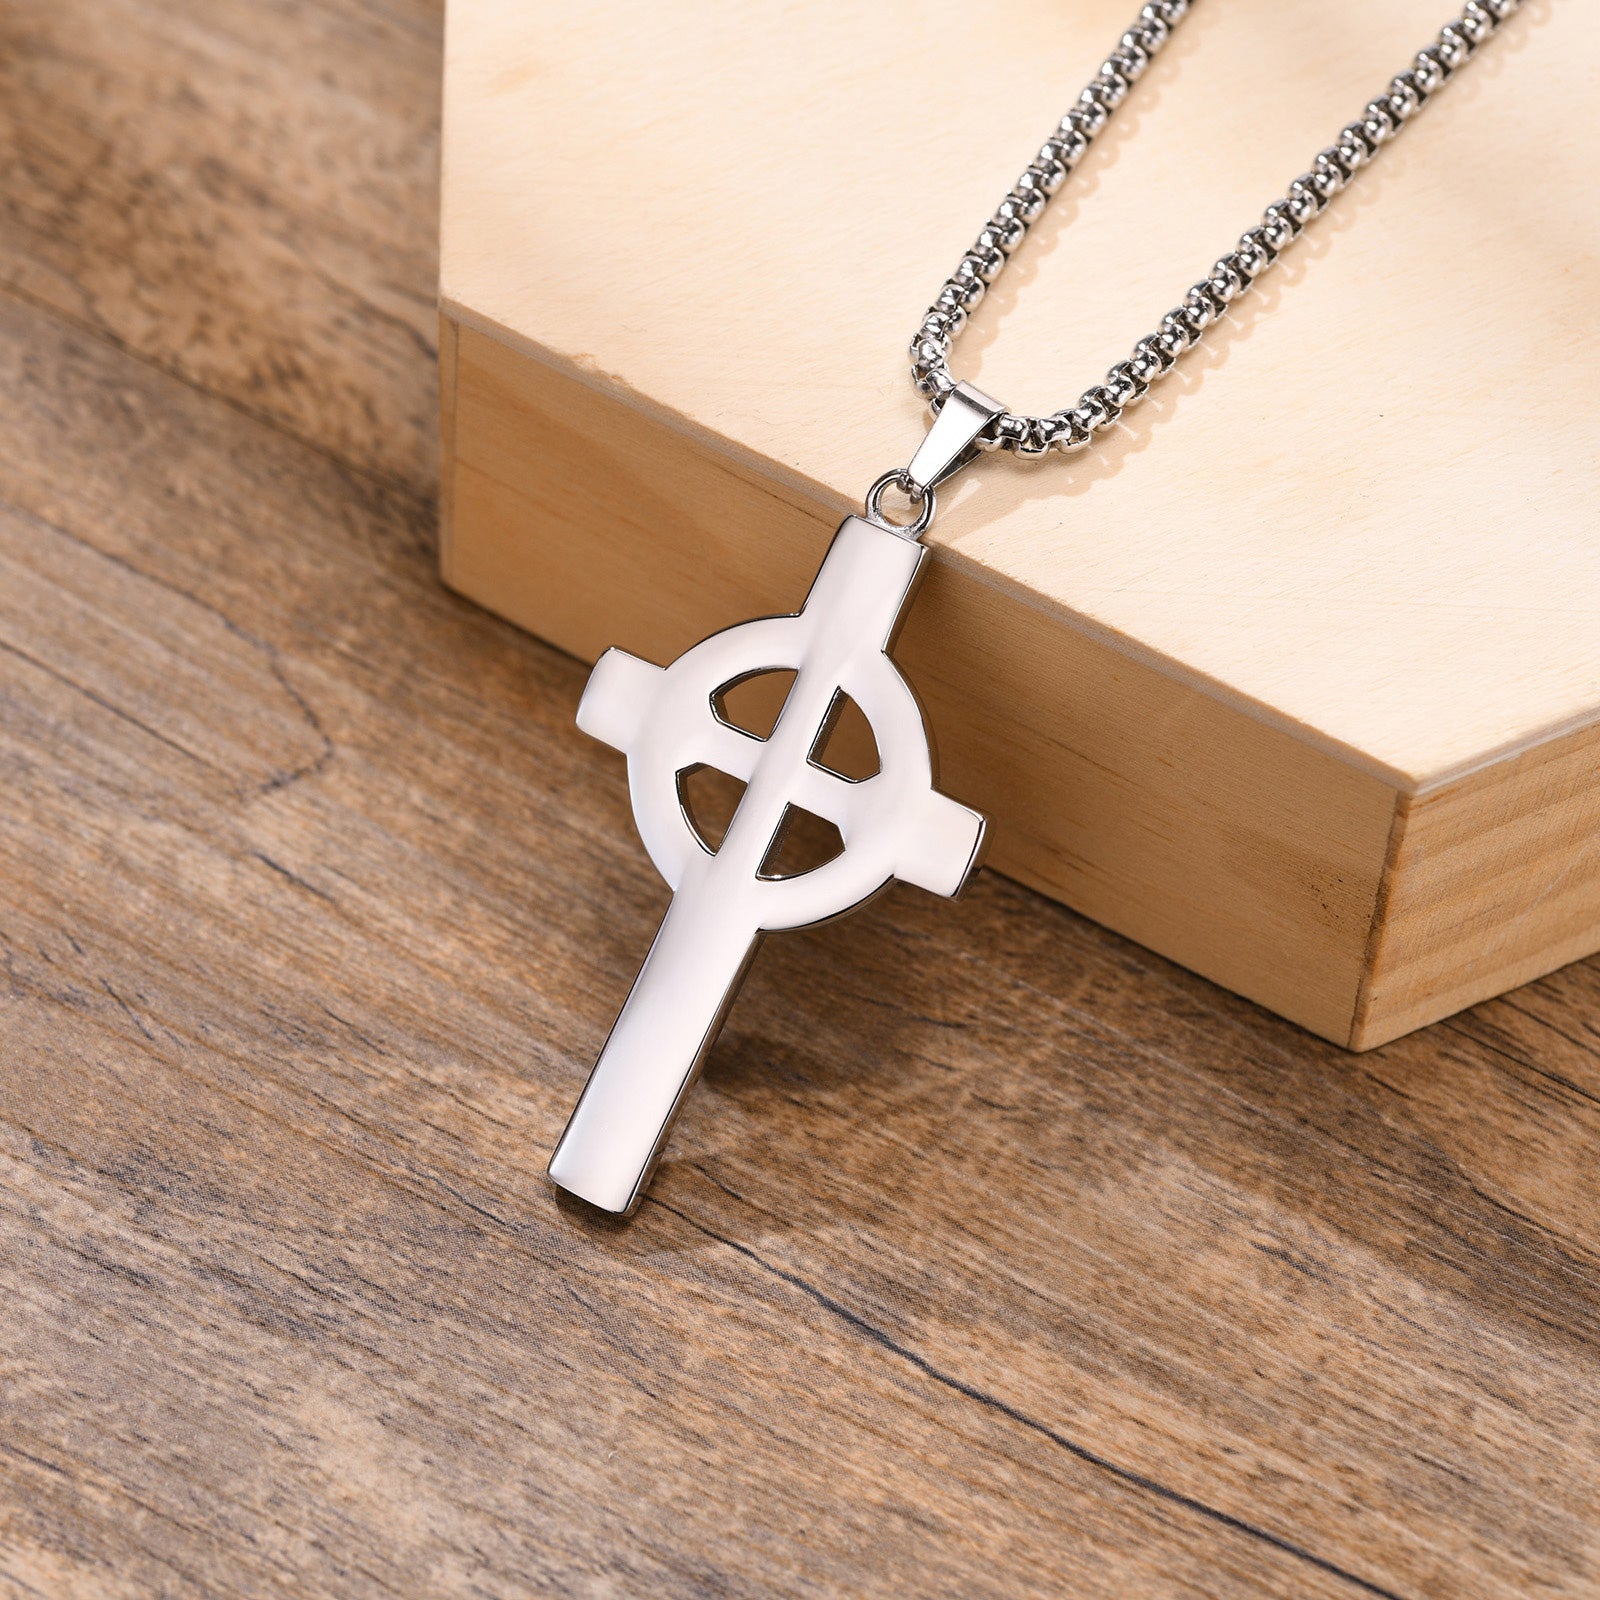 Stainless Steel Celtic Cross Necklace